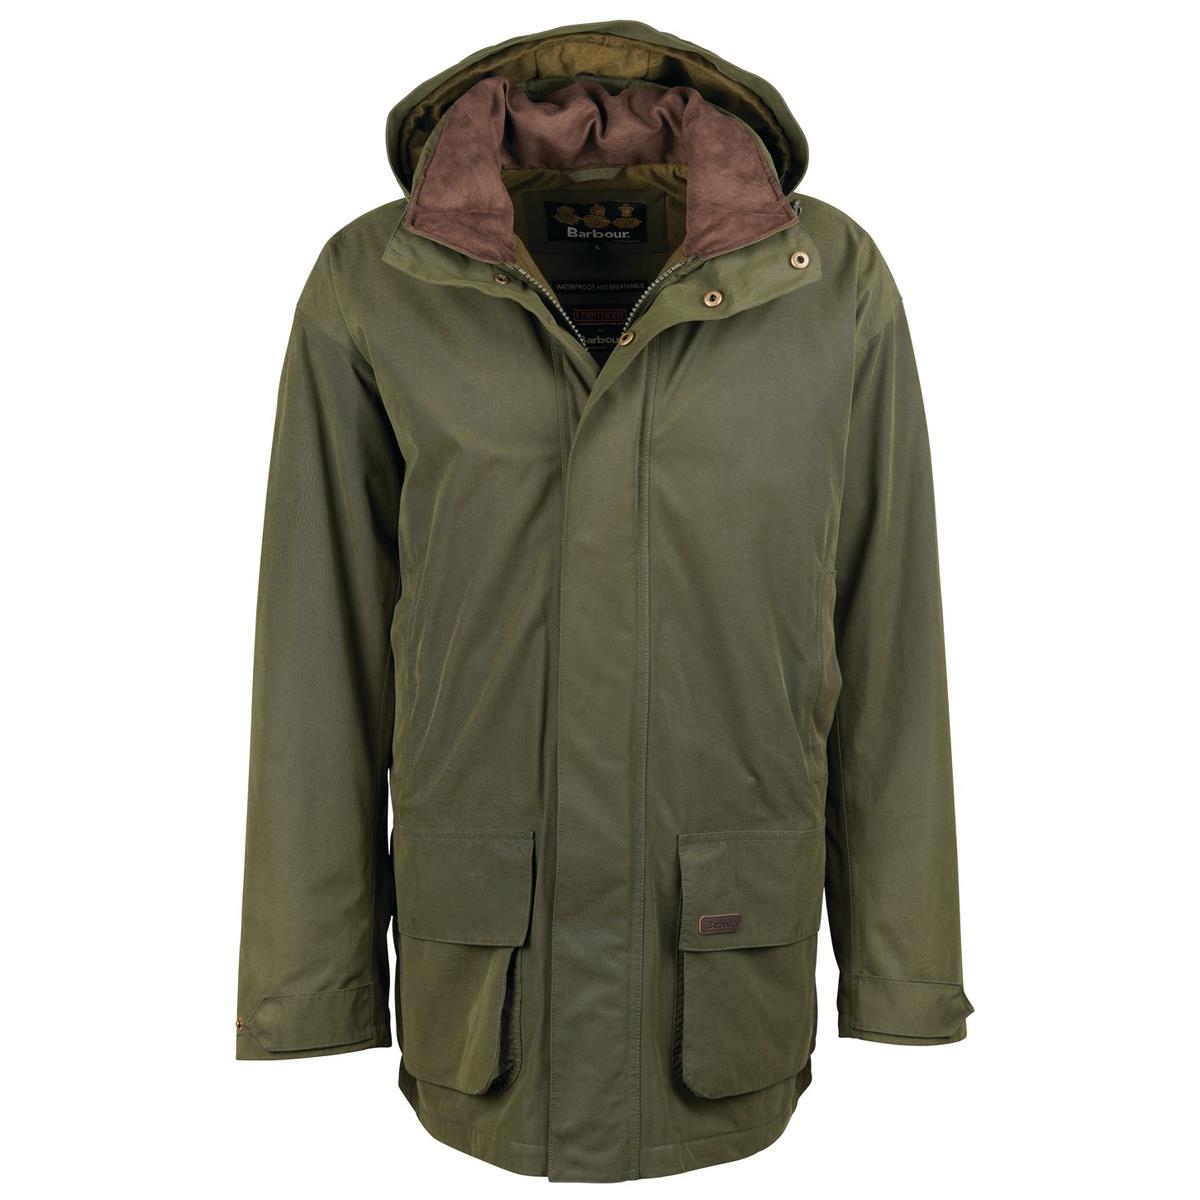 Can the Barbour Mens Beaconsfield Jacket be considered versatile?